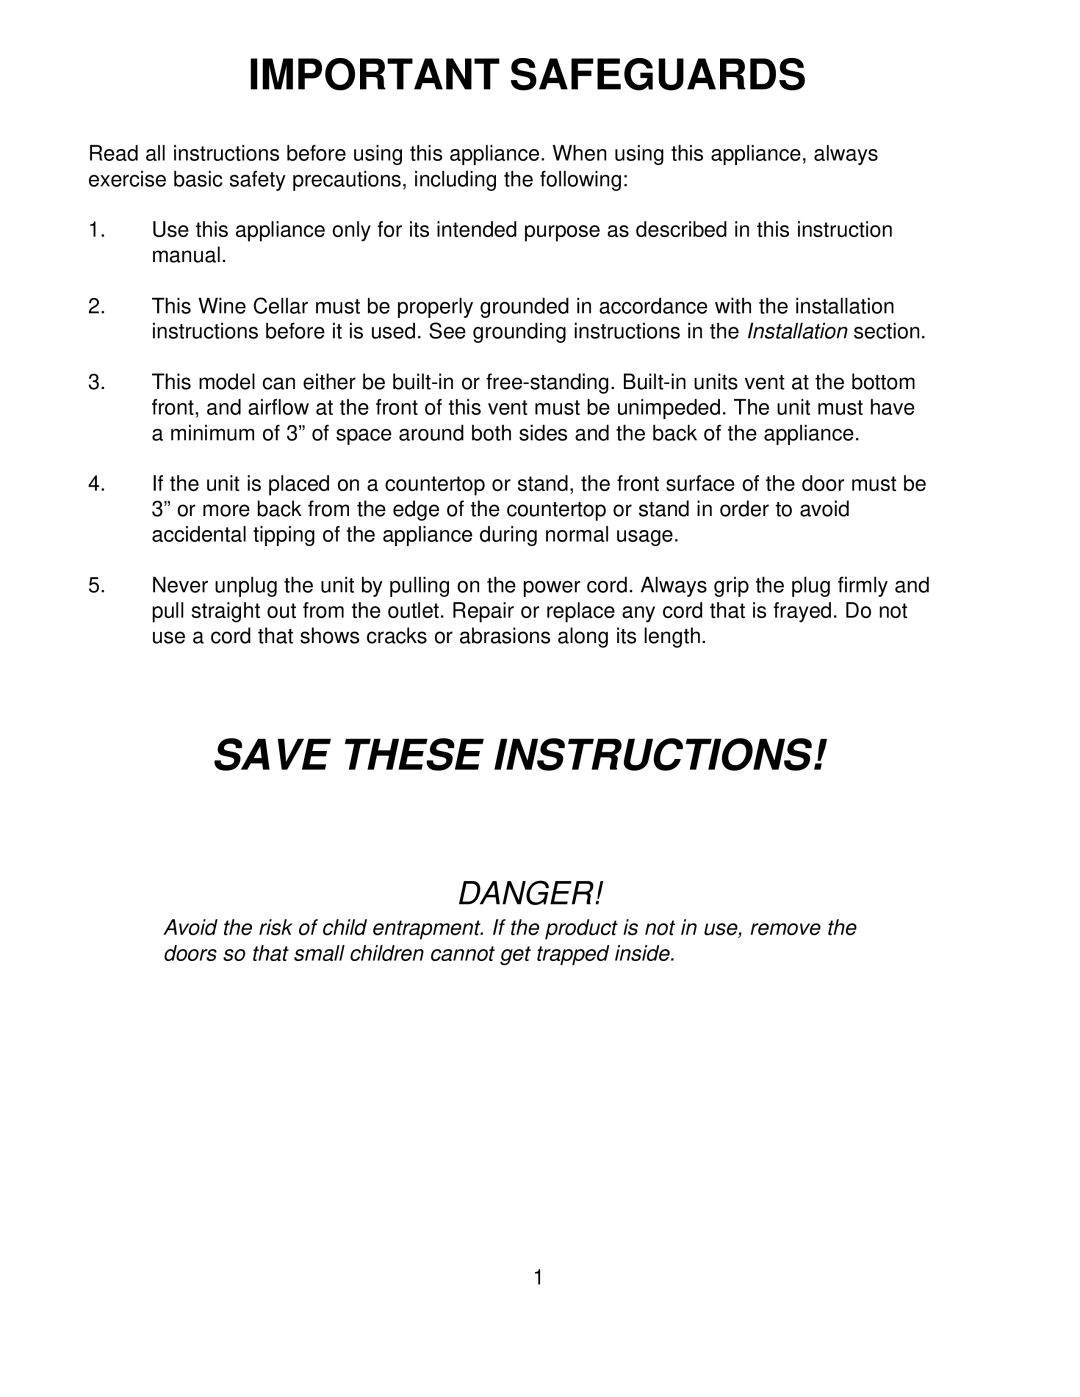 Franklin Industries, L.L.C FWC36 manual Important Safeguards, Danger, Save These Instructions 